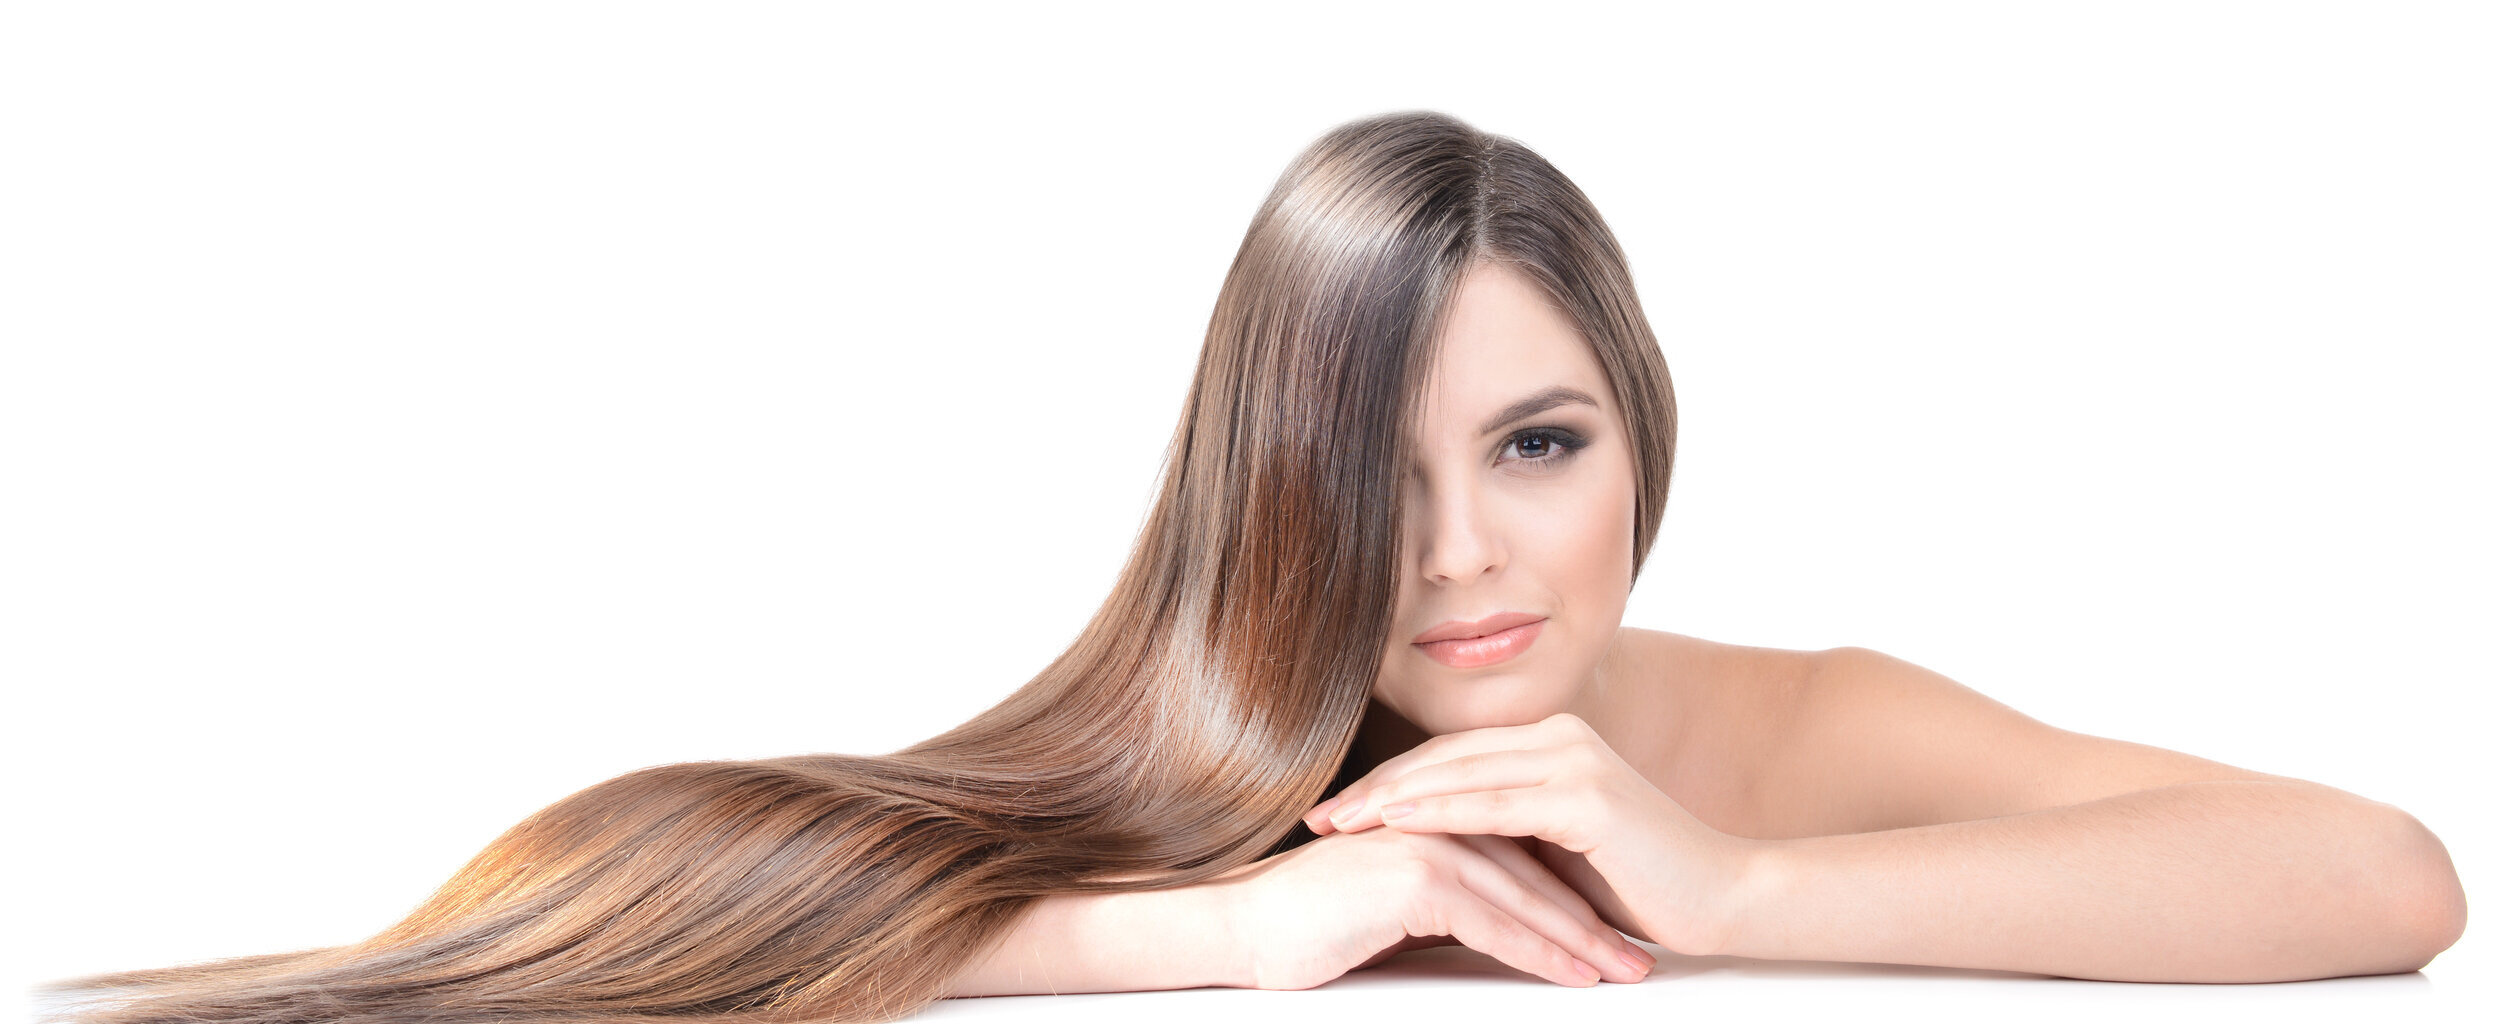 Rapunzel | Hair Extensions & Female Hairloss Solutions | Marlow, South Bucks